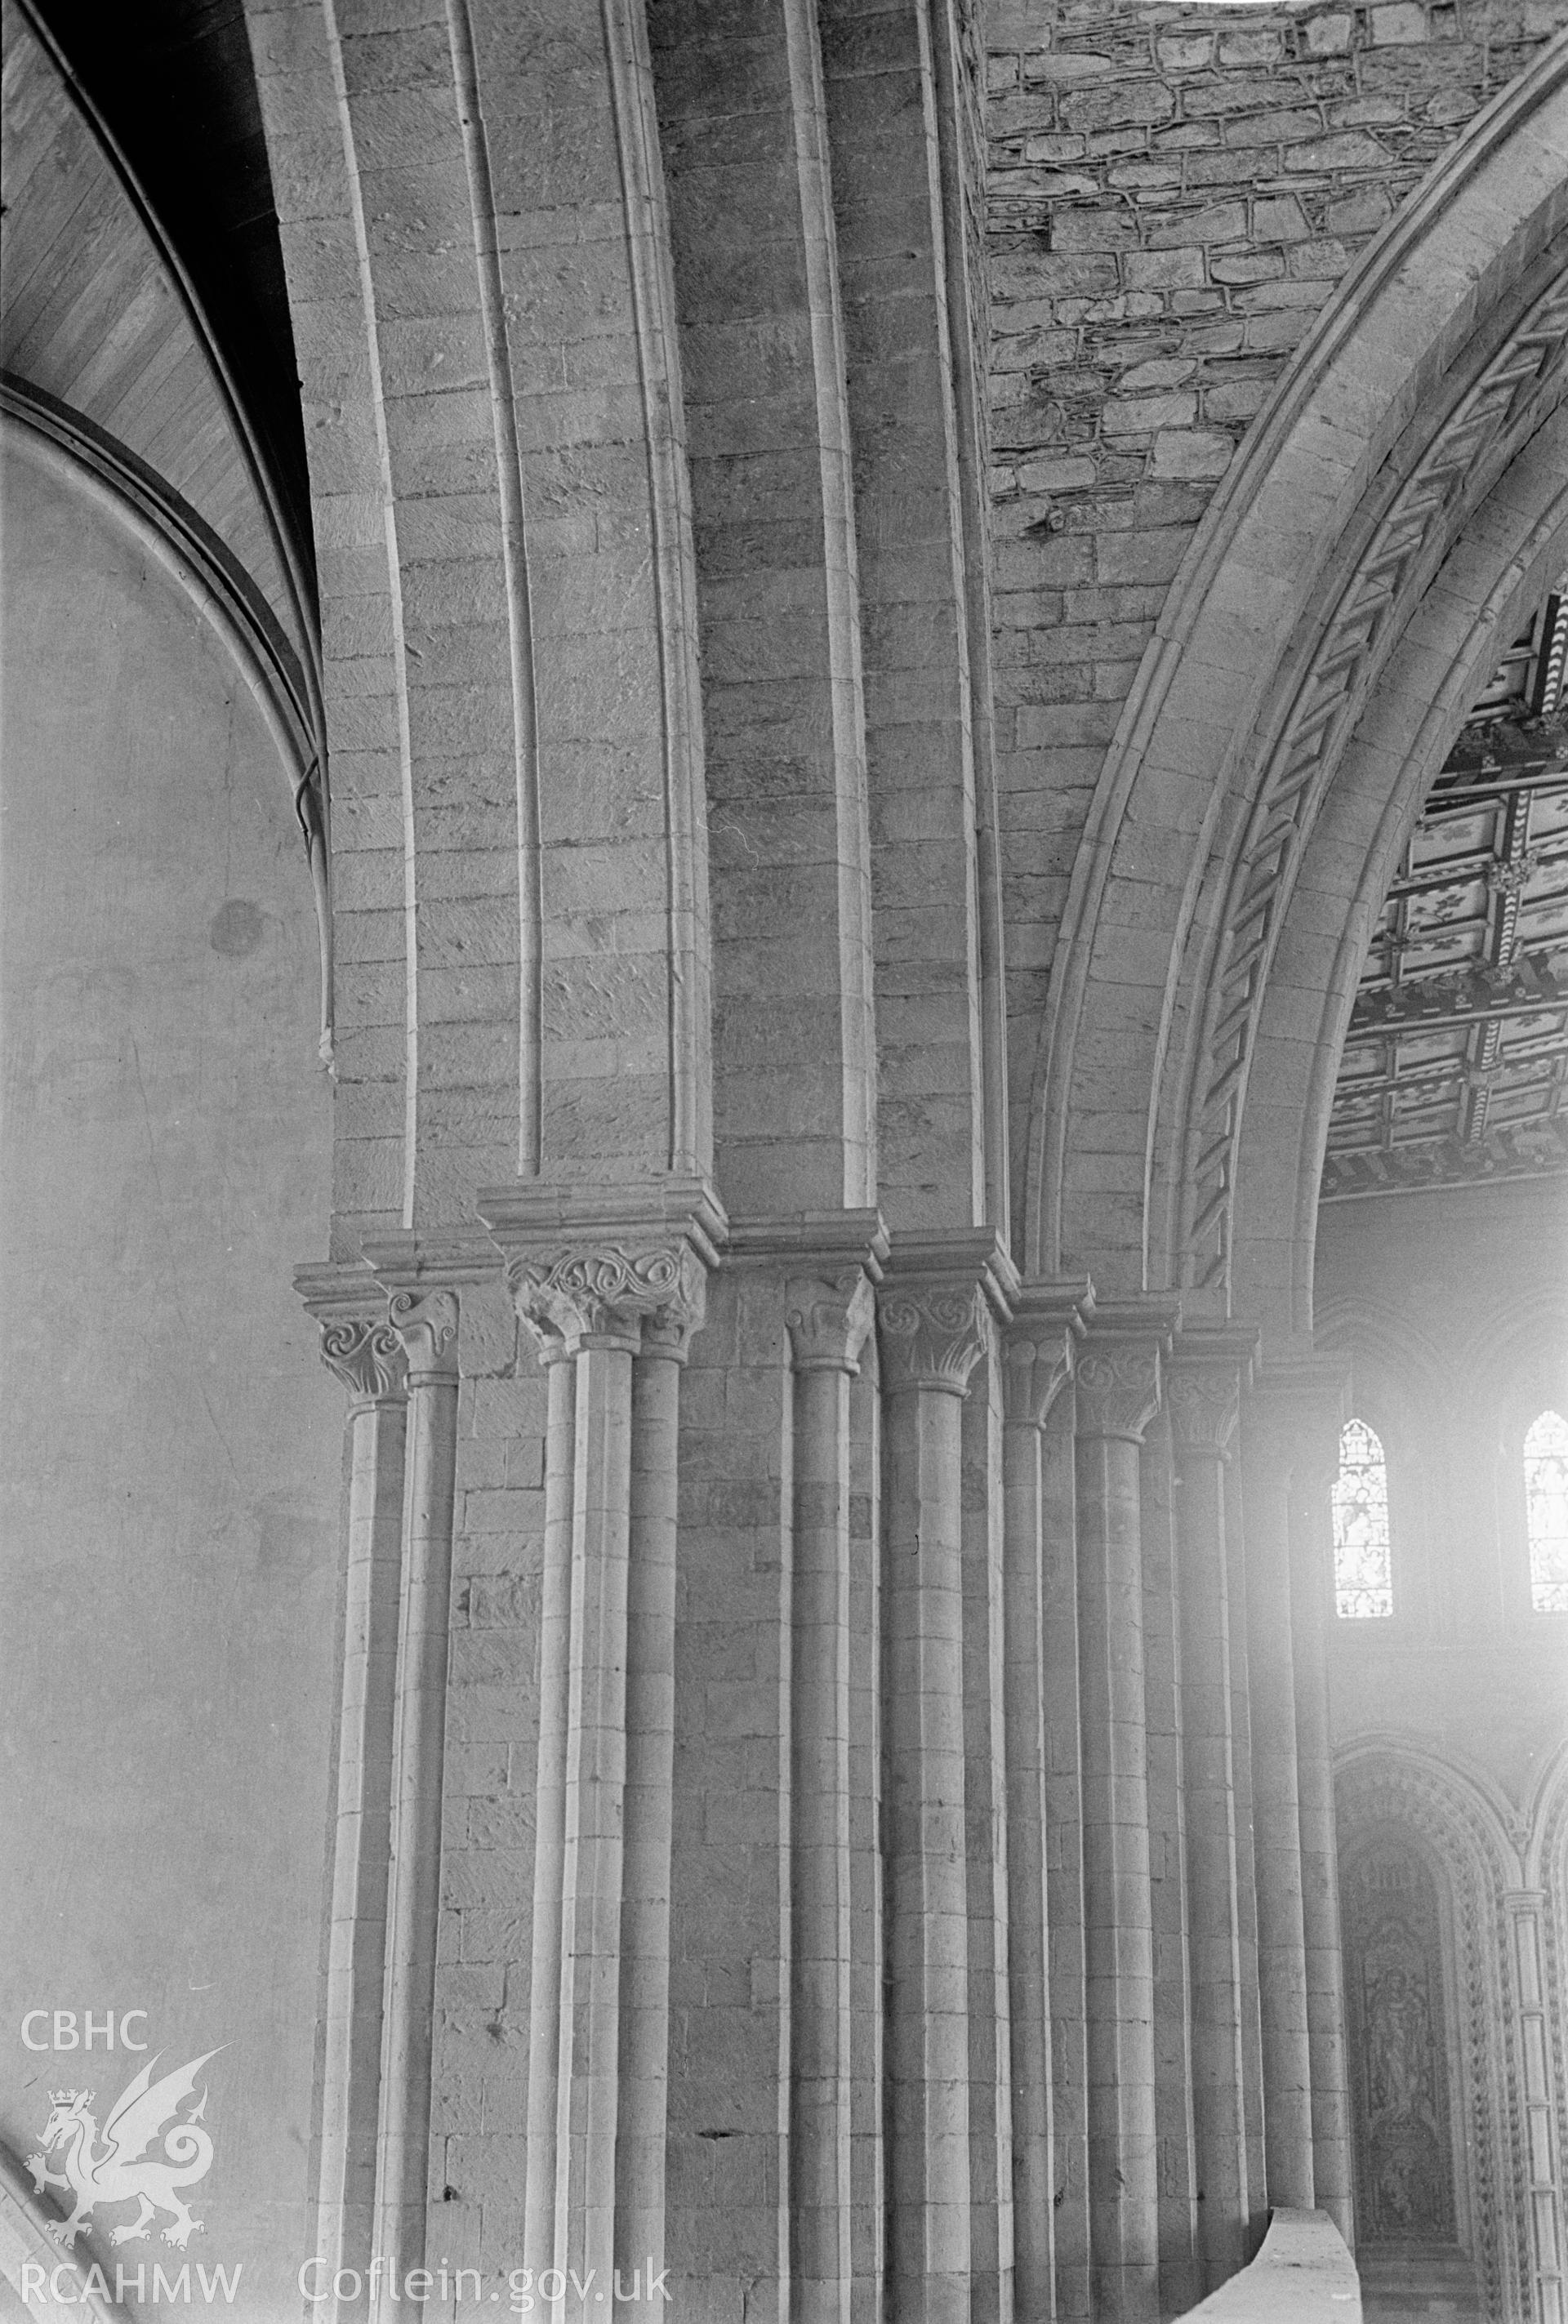 Black and white nitrate negative showing interior view of St Davids Cathedral.